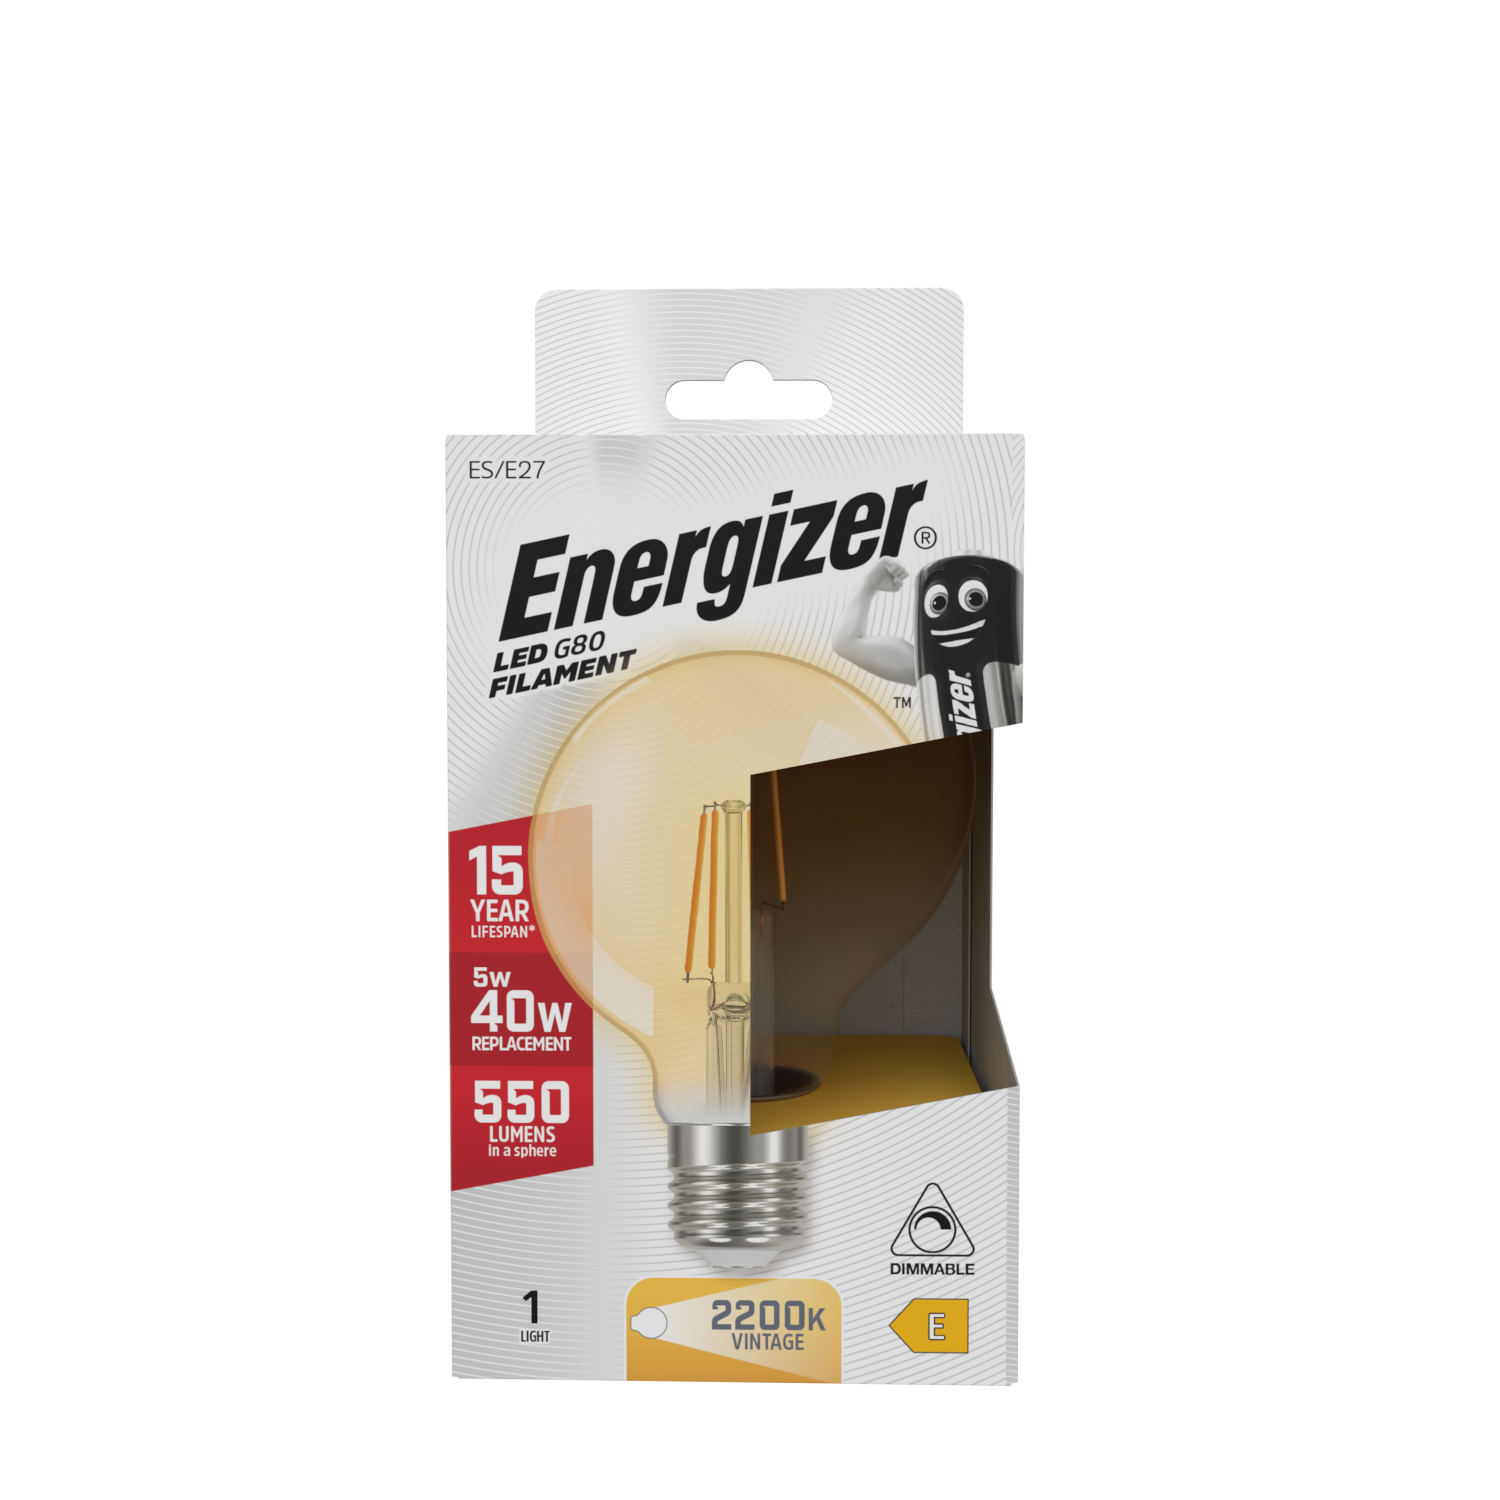 Energizer LED Filament Gold G80 E27 (ES) 550lm 5W 2,200K (Warm White) Dimmable, Box of 1